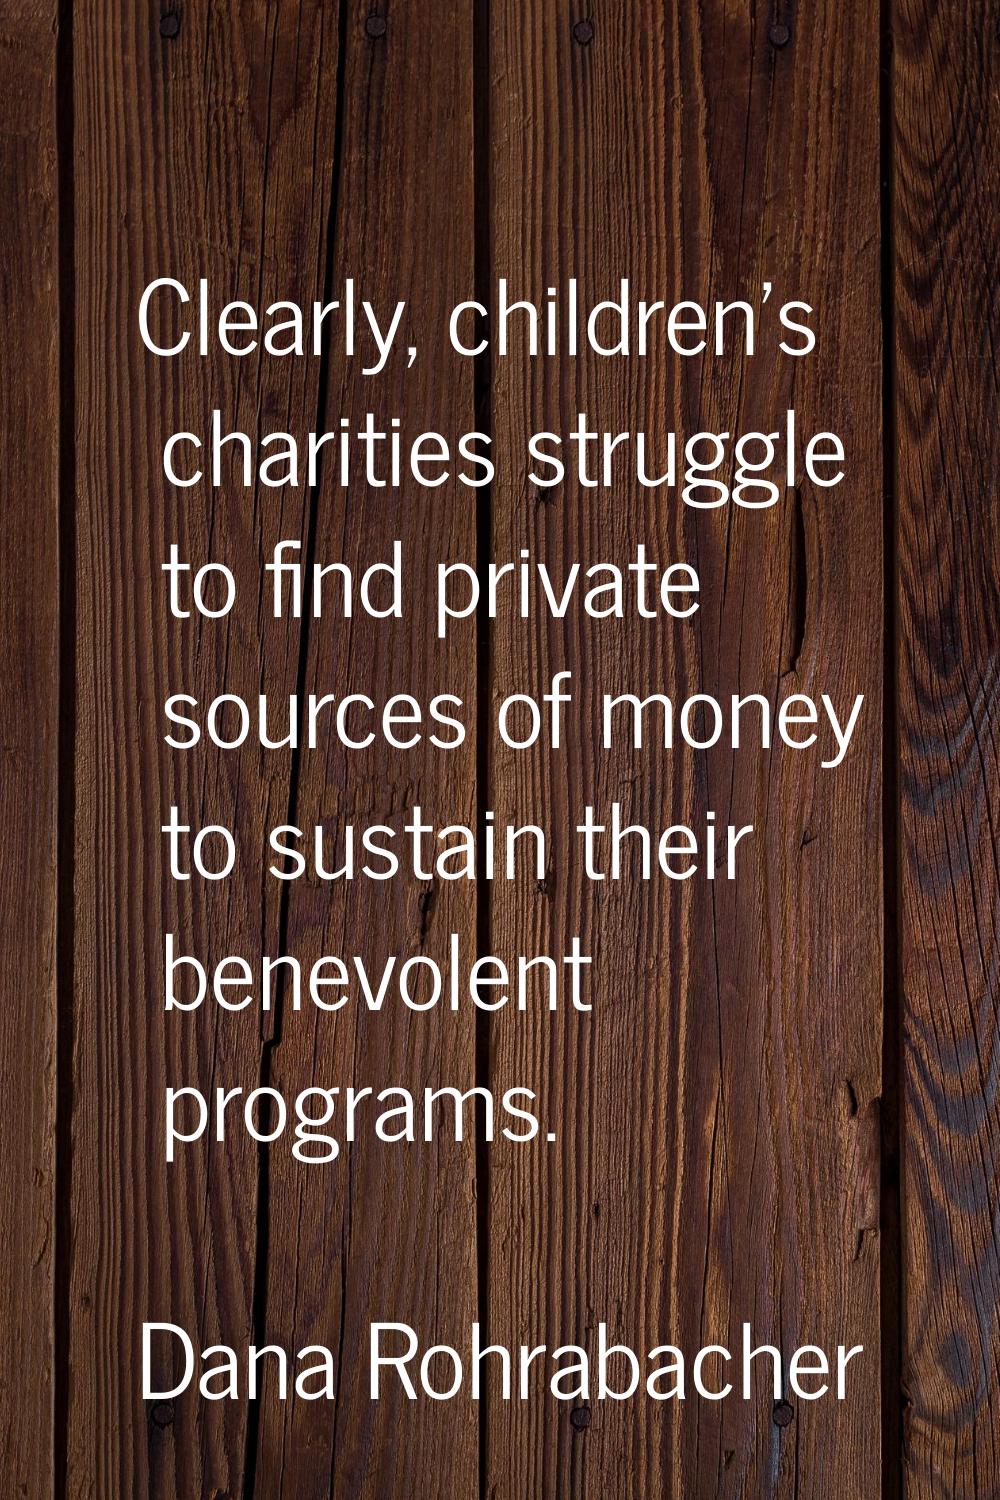 Clearly, children's charities struggle to find private sources of money to sustain their benevolent